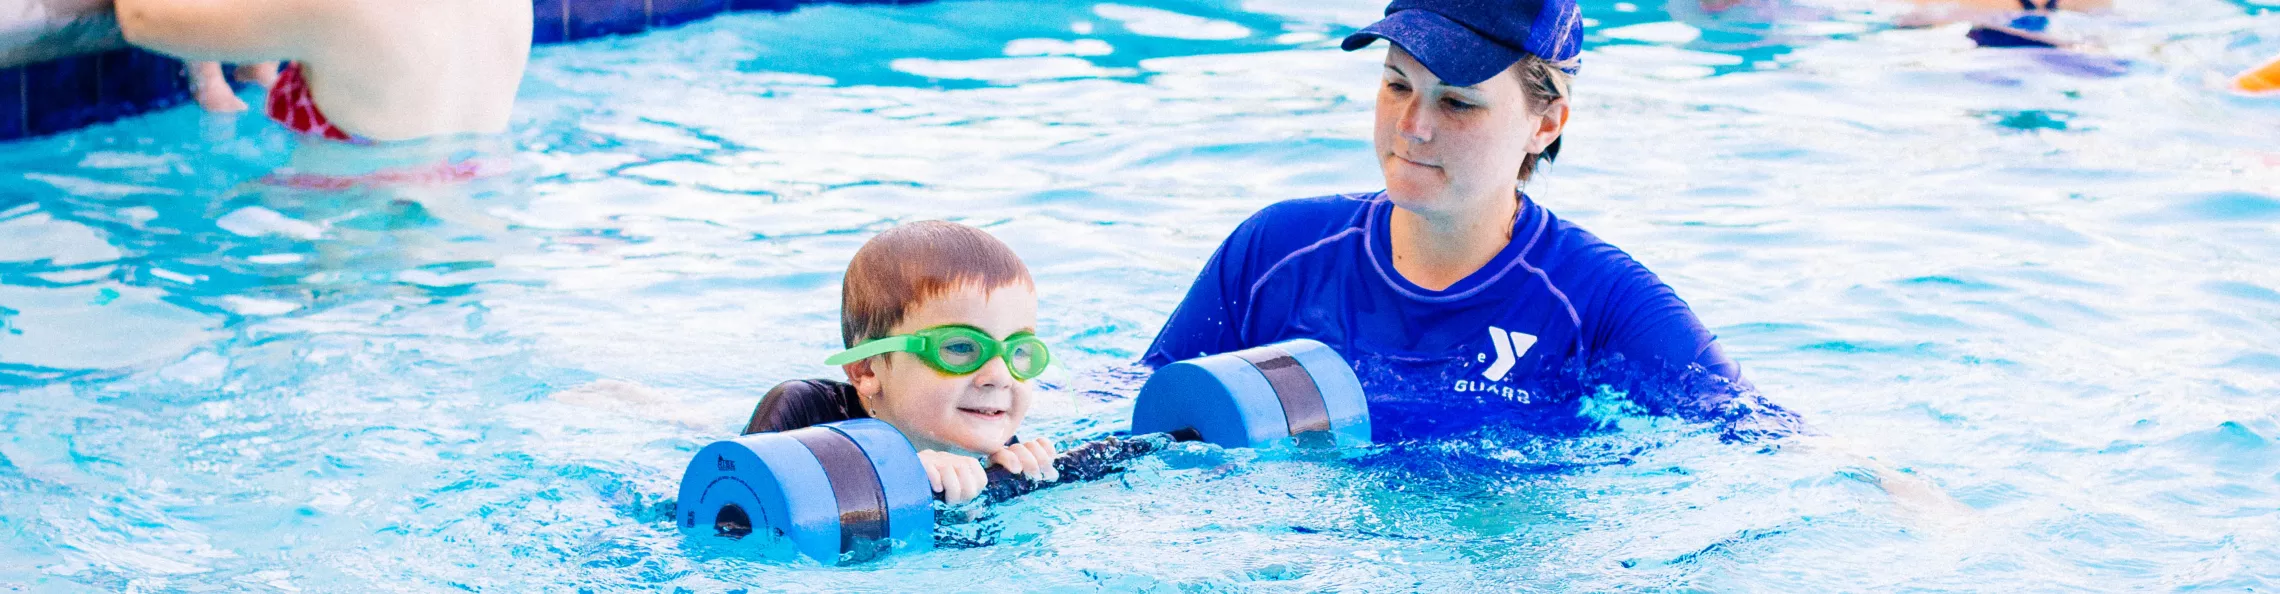 Lifeguard assisting male child during a swim lesson using a flotation device